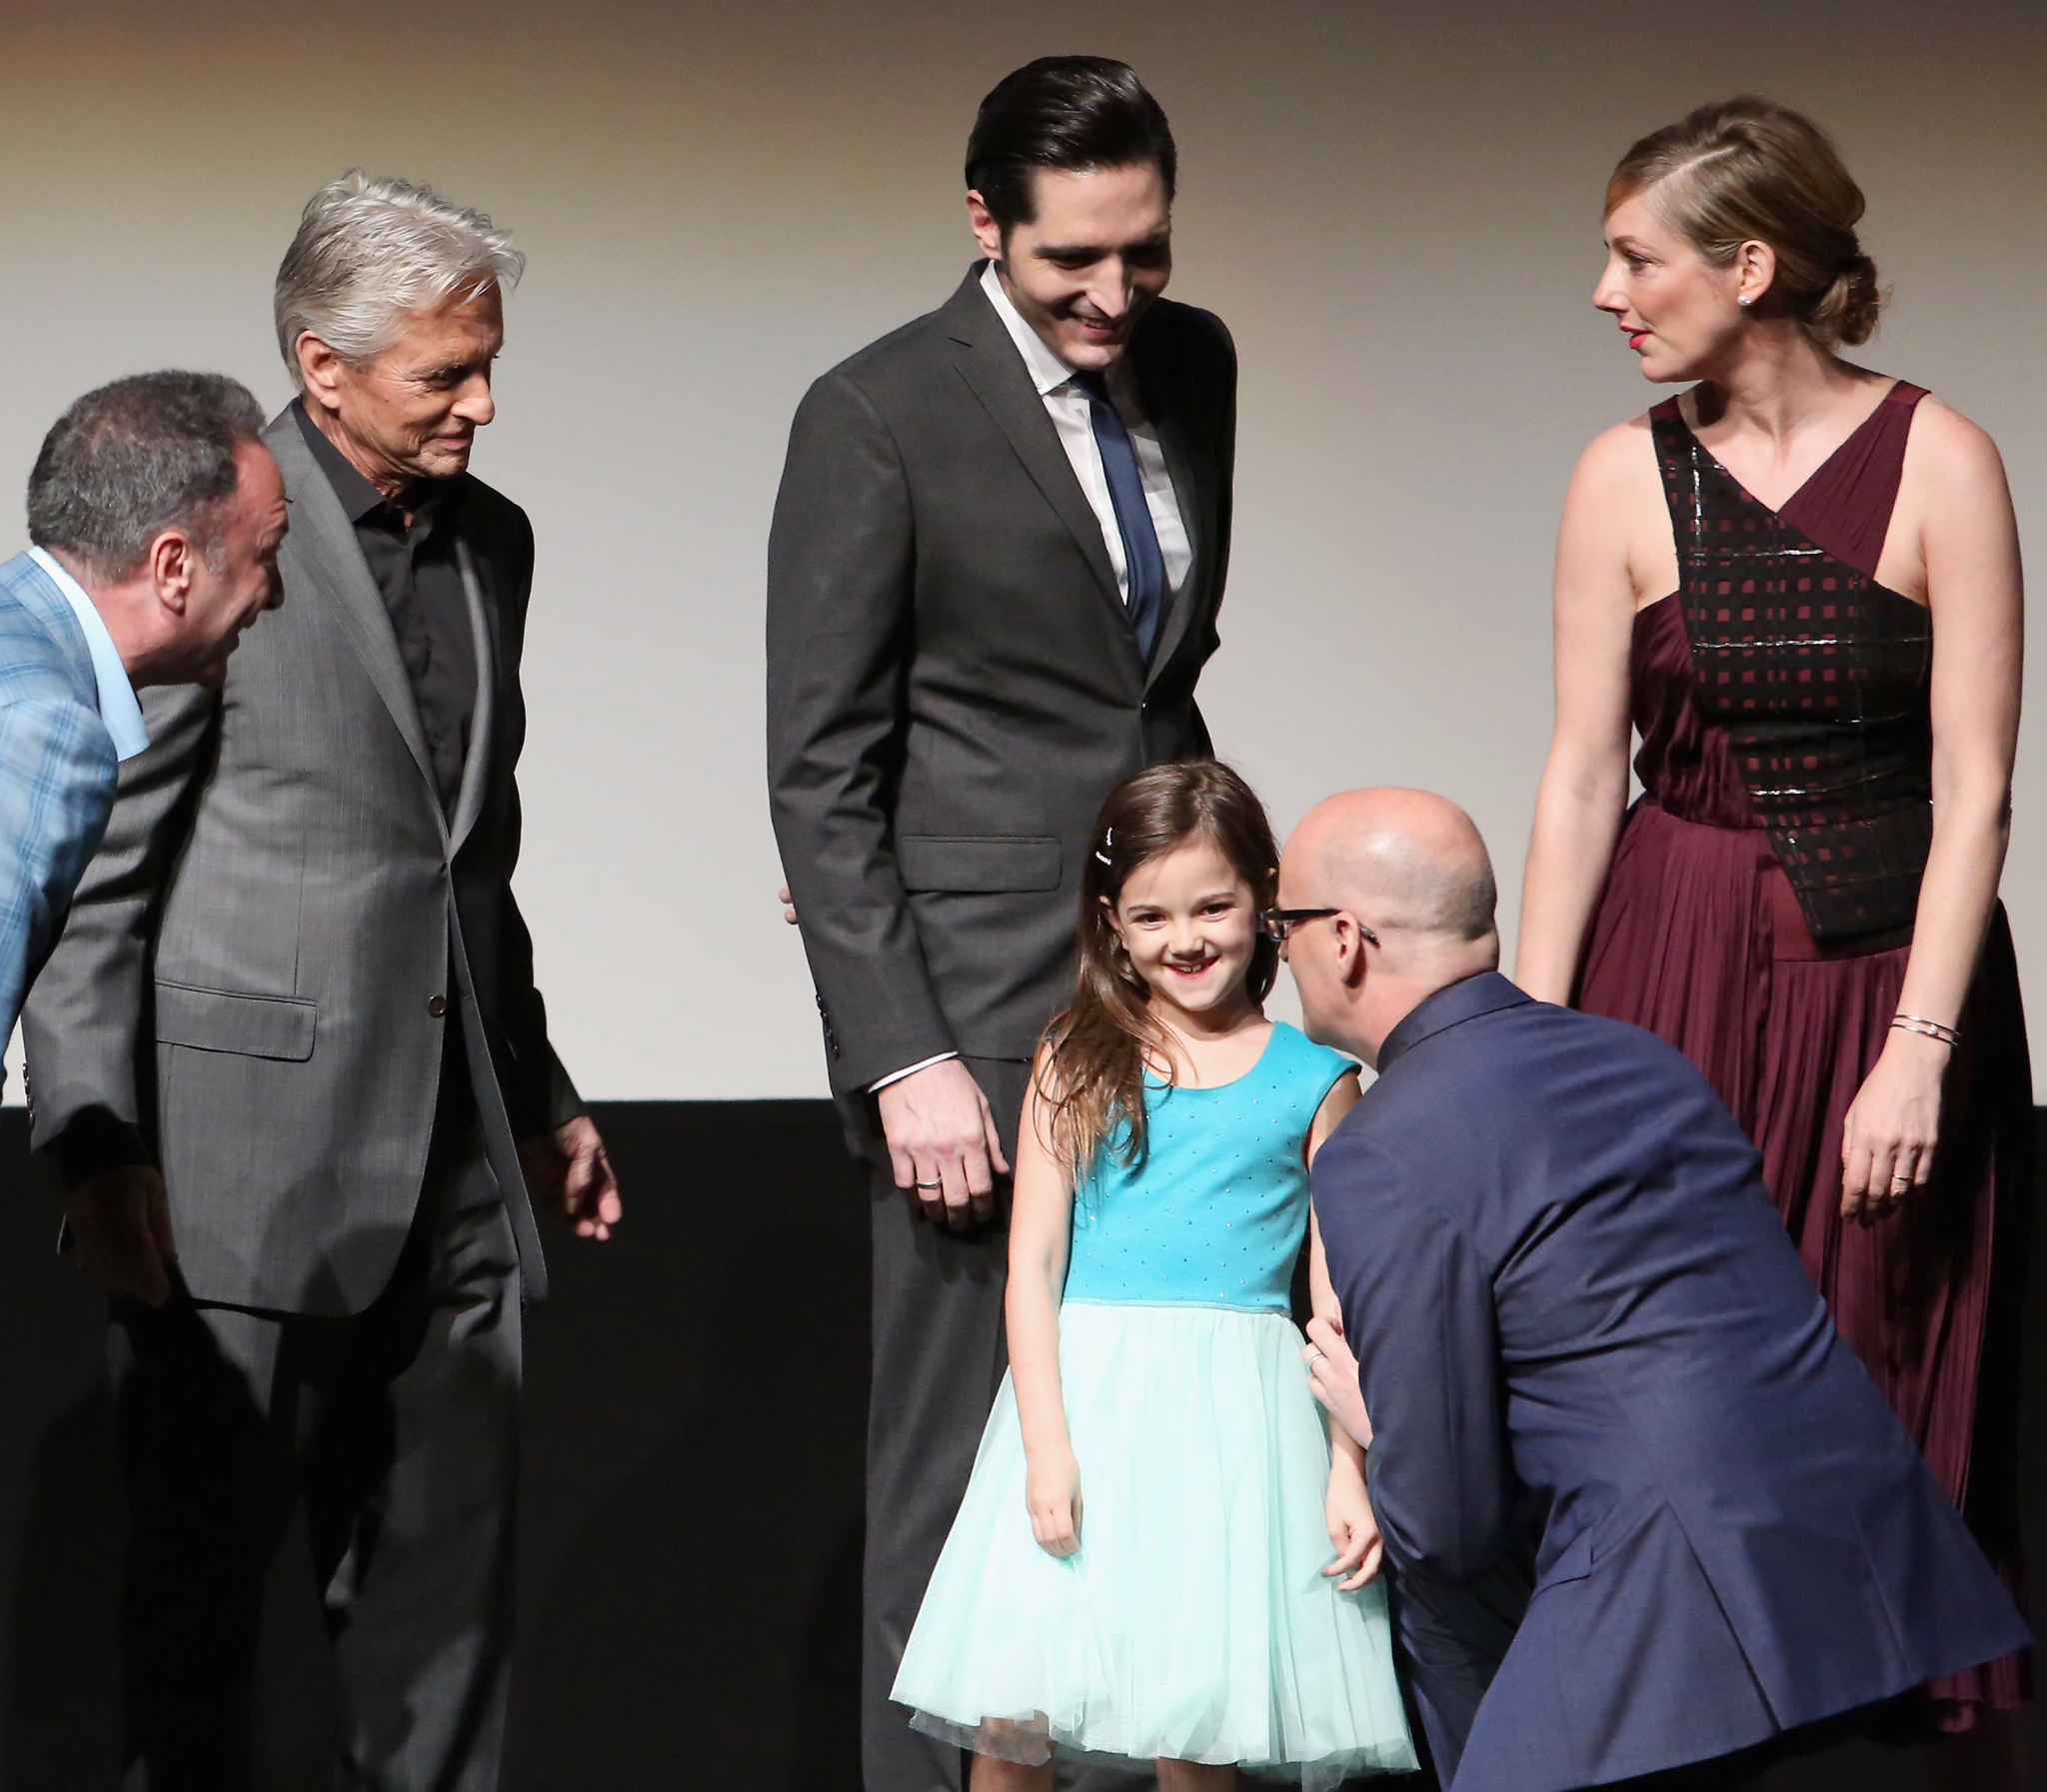 Michael Douglas, Louis D'Esposito, Judy Greer, Peyton Reed, David Dastmalchian and Abby Ryder Fortson at event of Skruzdeliukas (2015)